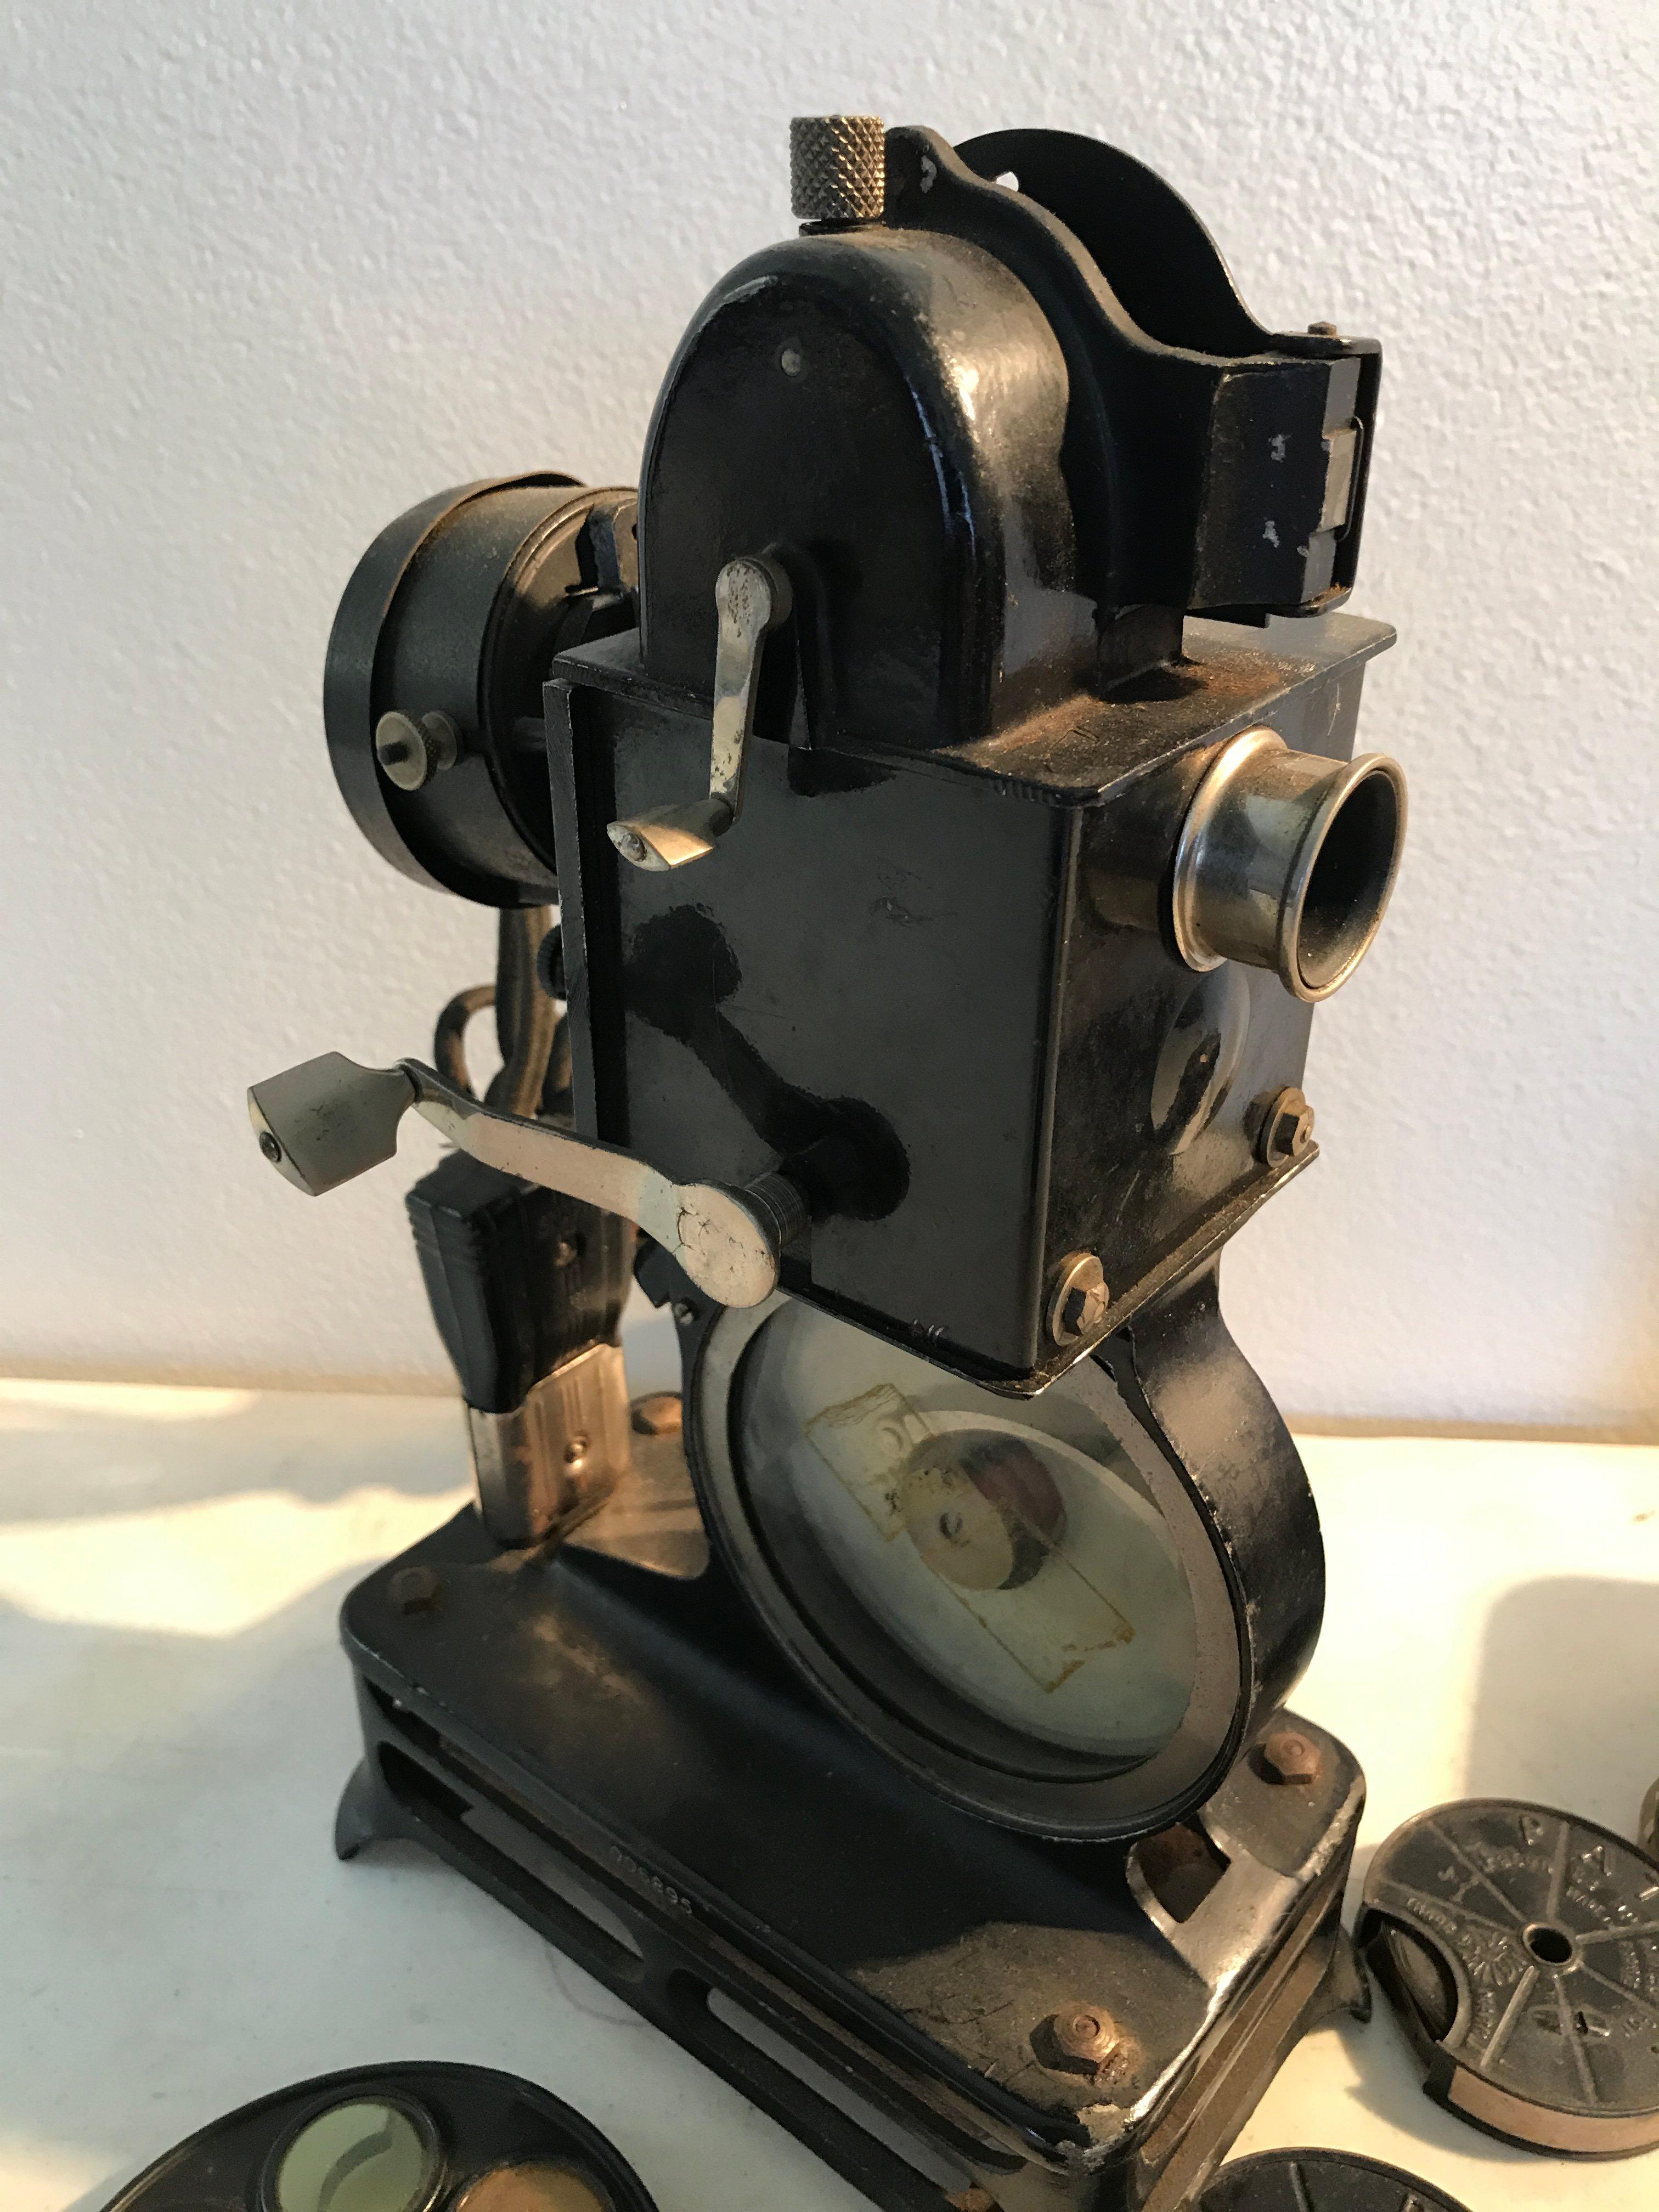 Antique Pathex Silent Film Projector w/ Movie Camera and Reels